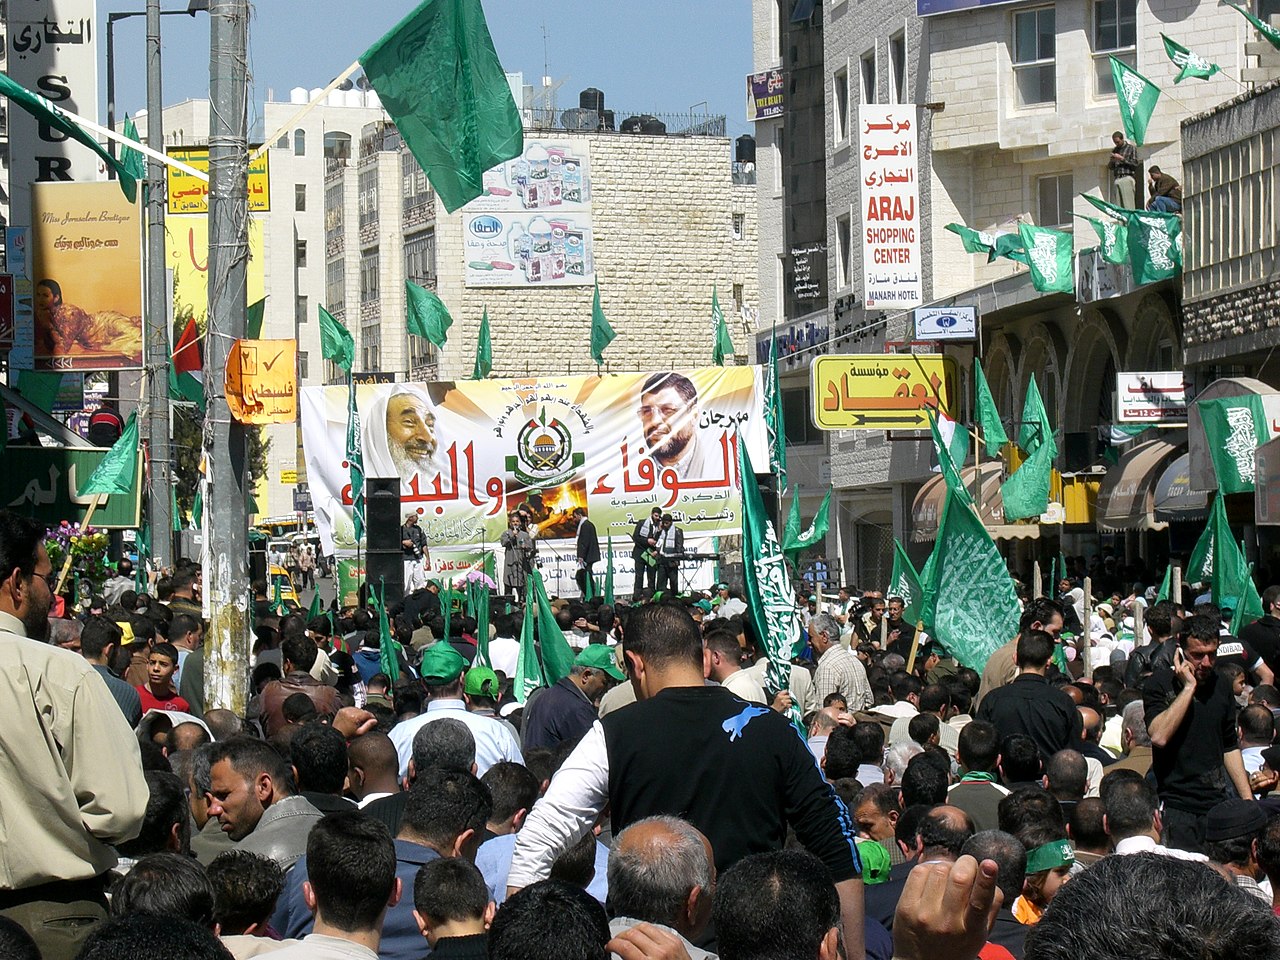 Palestinian Arabs strongly back Hamas and its extremist goals.